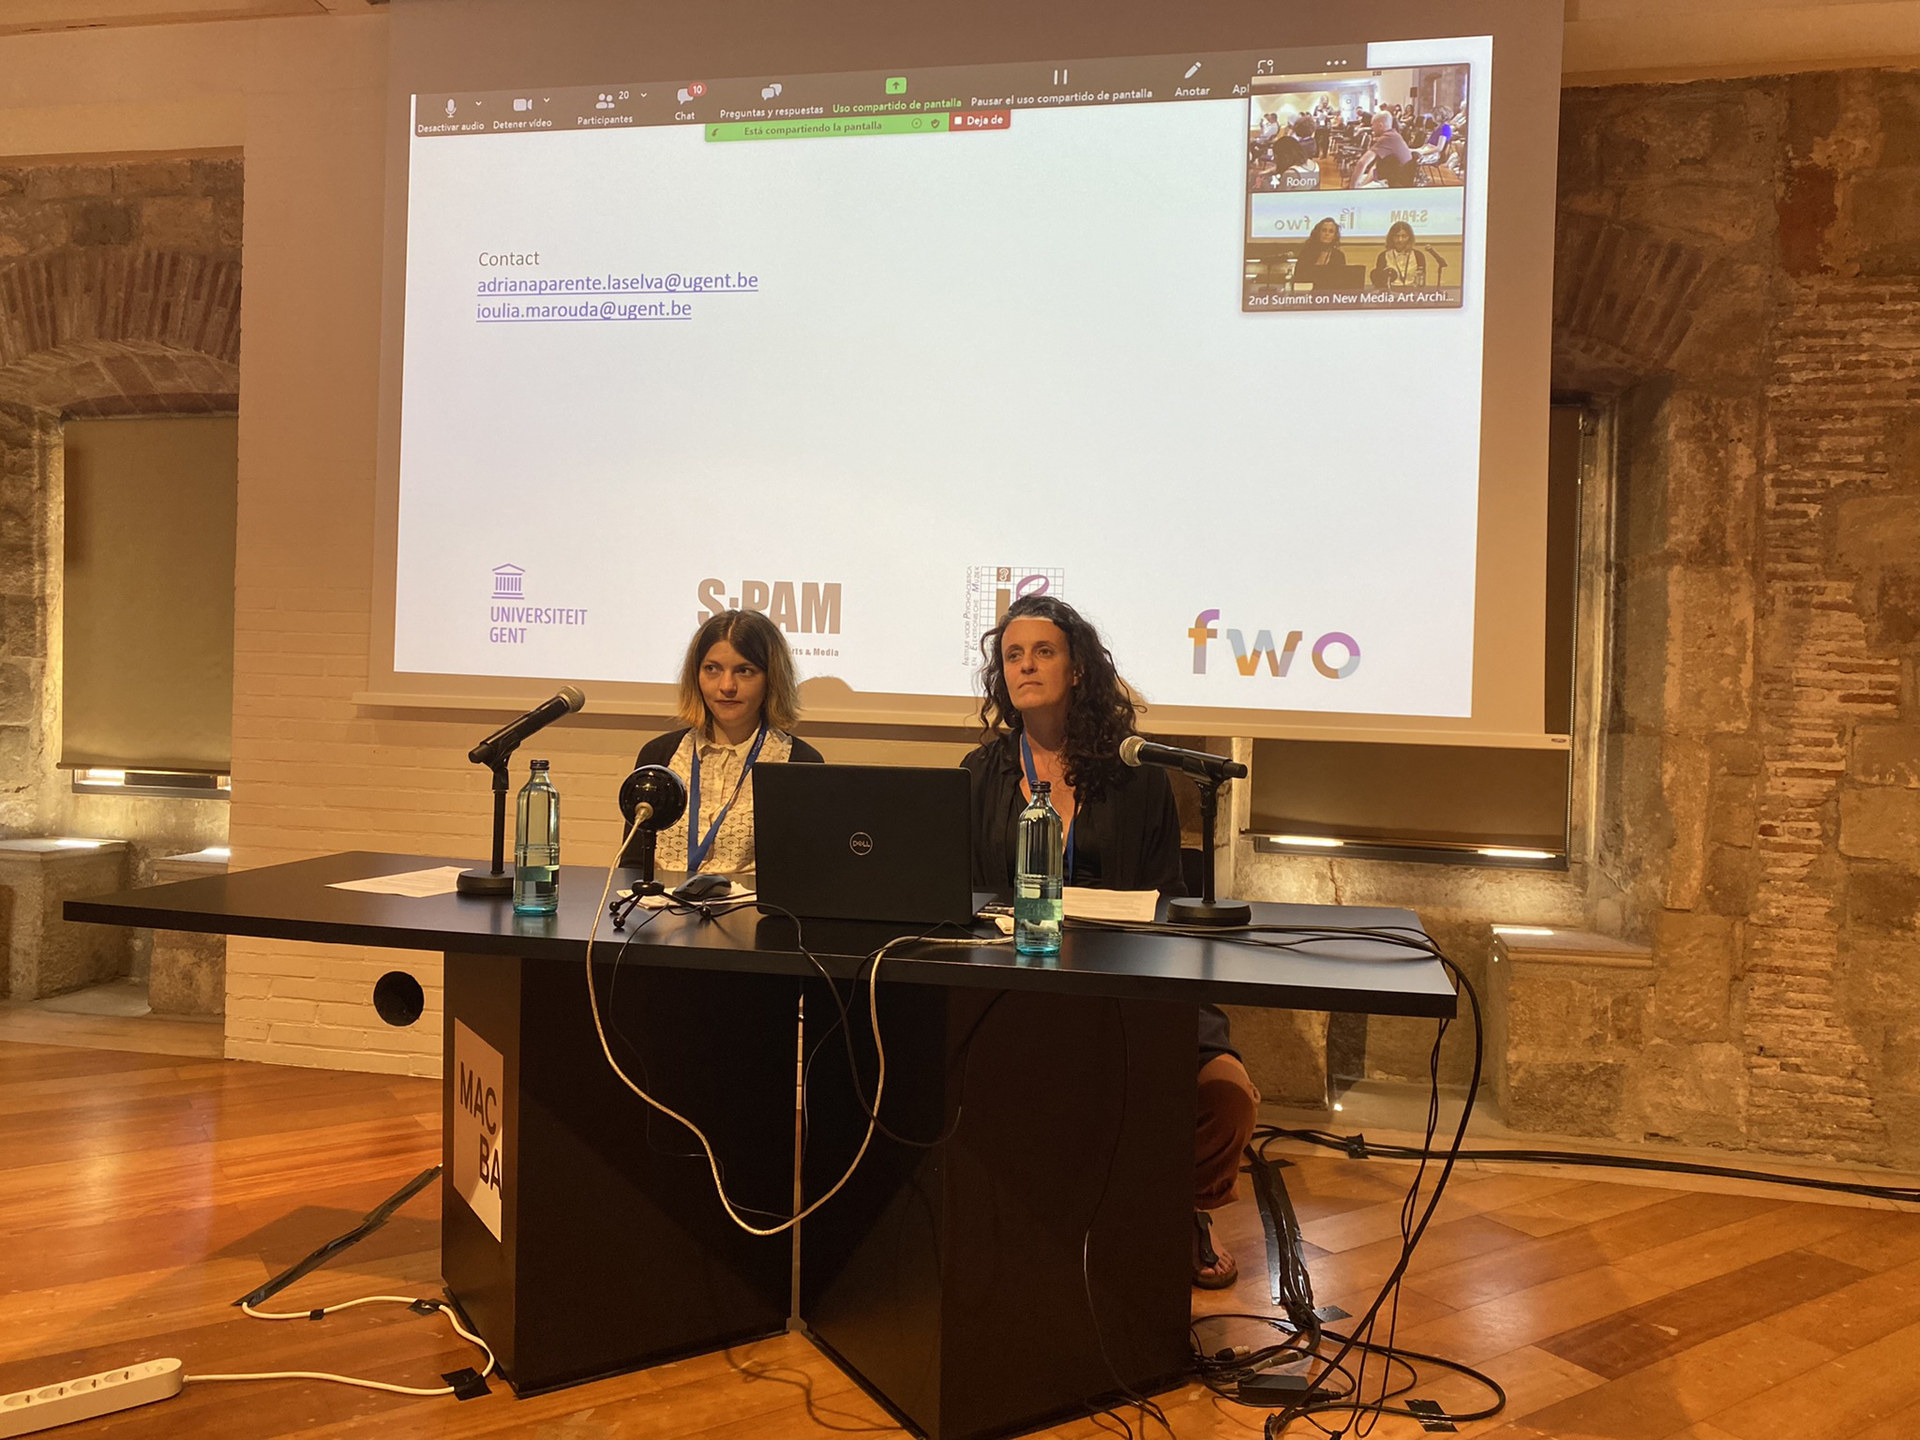 ©ISEA2022: 27th International Symposium on Electronic Art, Adriana La Selva and Ioulia Marouda, Practicing Odin Teatret’s Archives: Virtual Translations of Embodied Knowledge Through Archival Practices